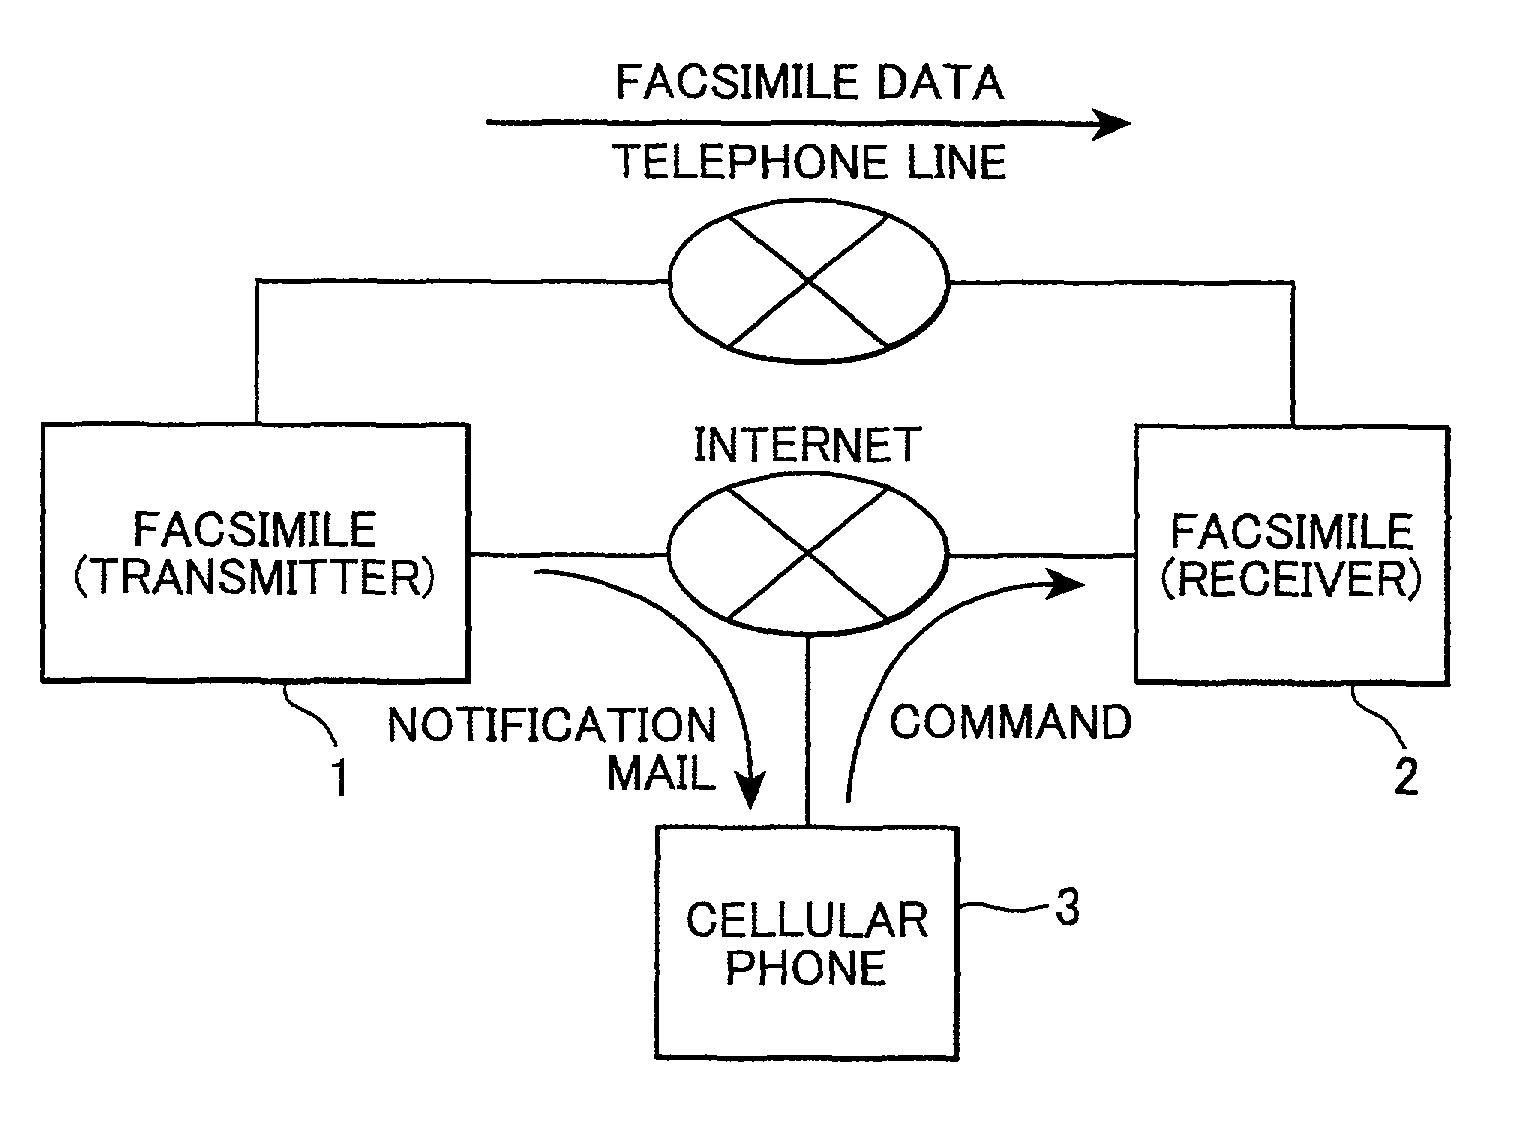 Data transmission/reception system that informs a user that image data has been transmitted